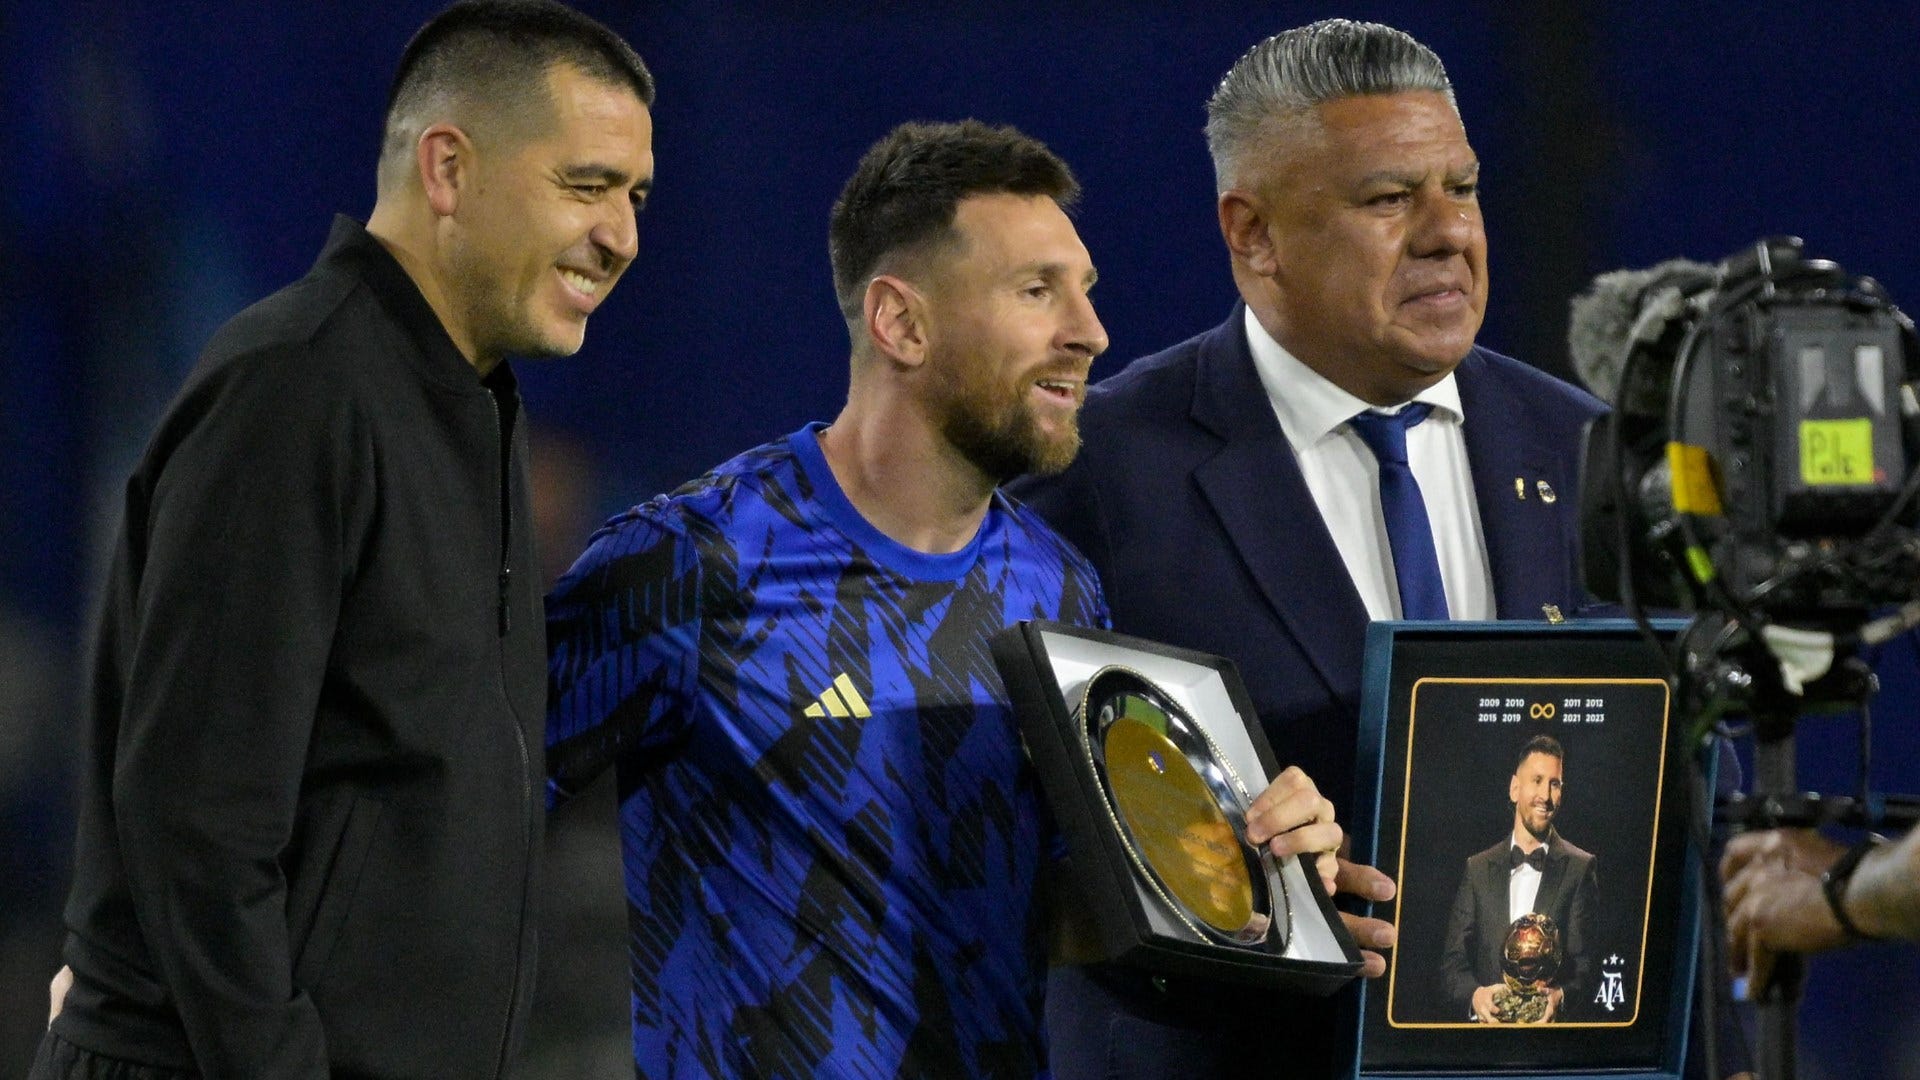 watch-fireworks-for-lionel-messi-stadium-announcer-goes-wild-as-beaming-inter-miami-star-is-honoured-by-argentina-for-his-eighth-ballon-d-or-success-with-two-sparkling-silver-plates-and-amp-a-kiss-from-juan-roman-riquelme-or-goal-com-india